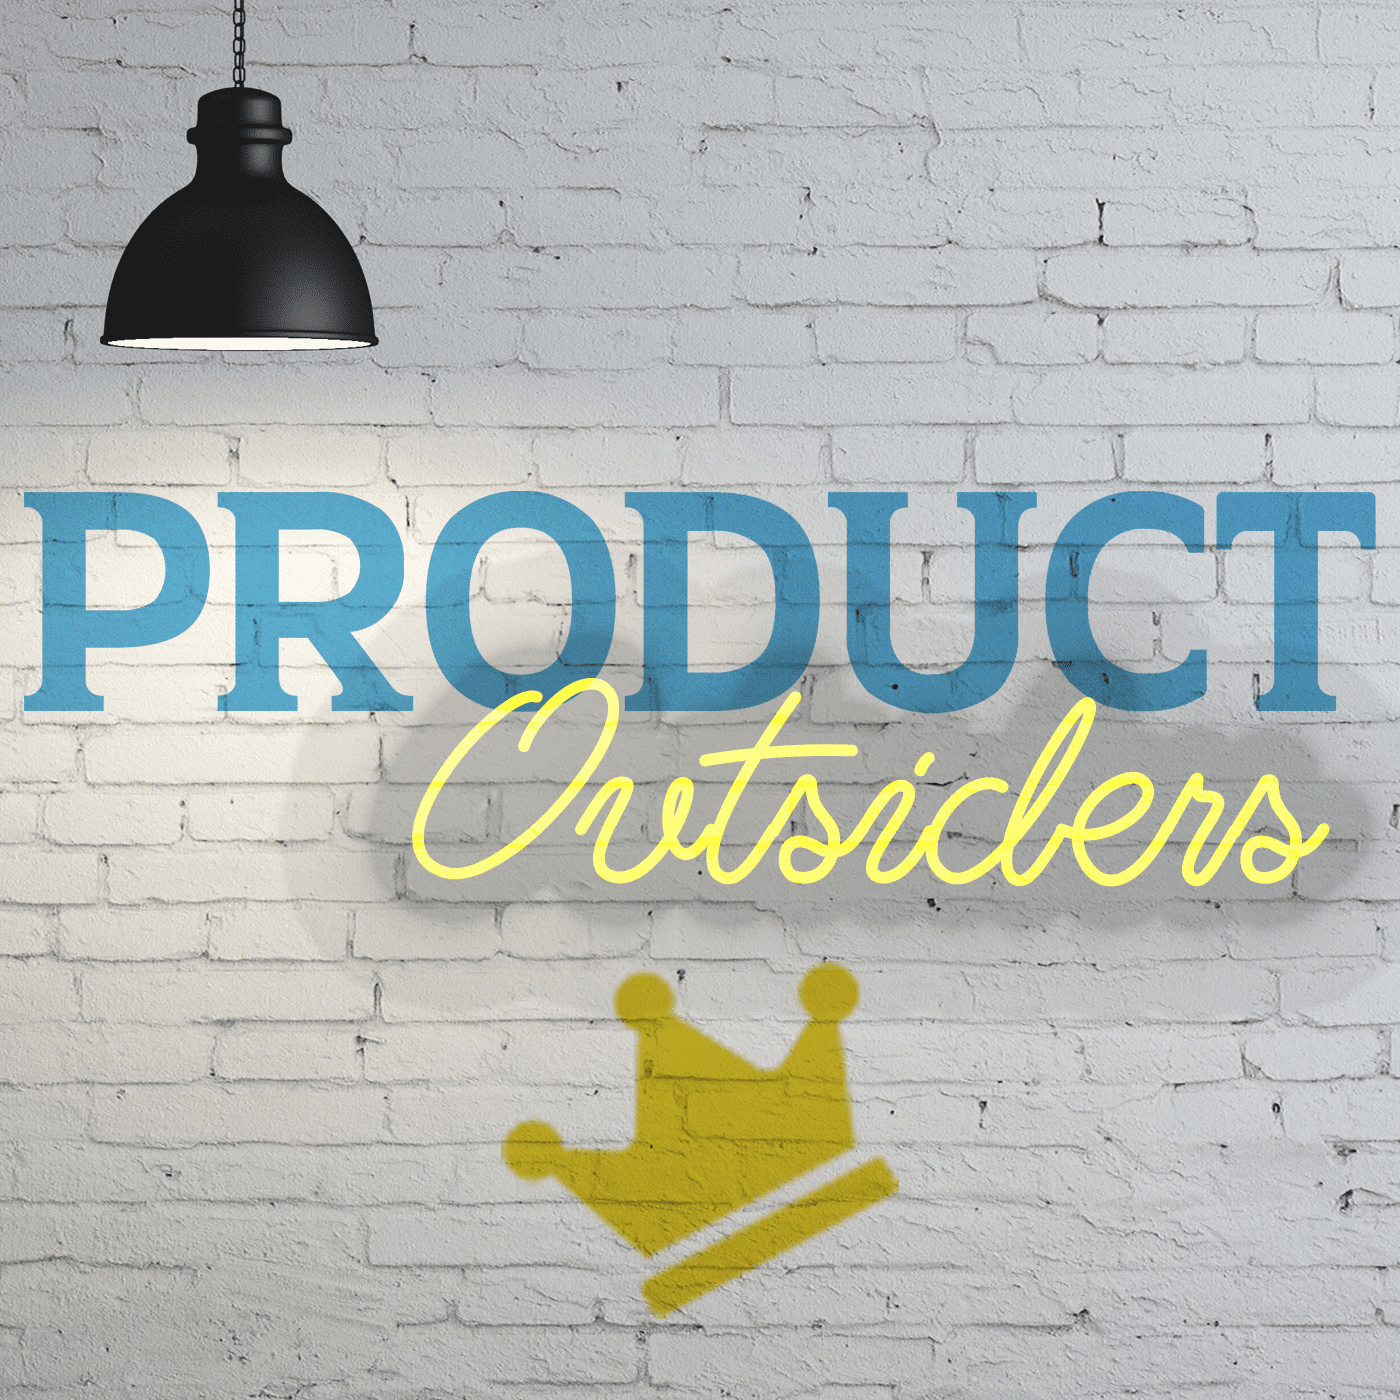 Product Outsiders